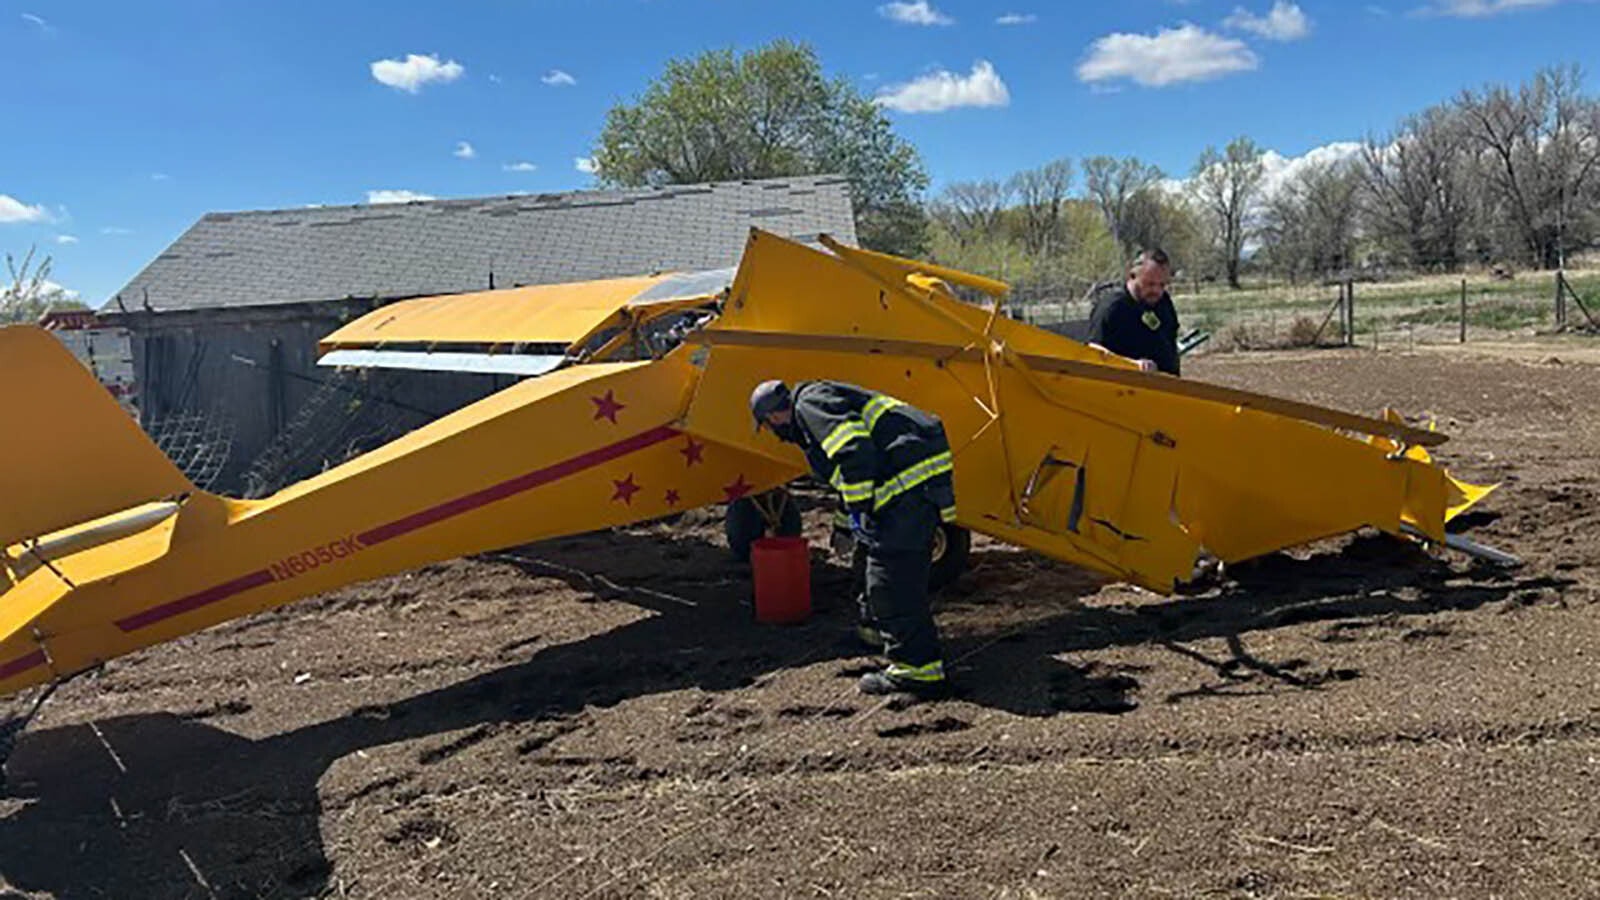 Nobody was hurt when this single-engine aircraft lost power after takeoff and had to crash-land near Powell on Friday.